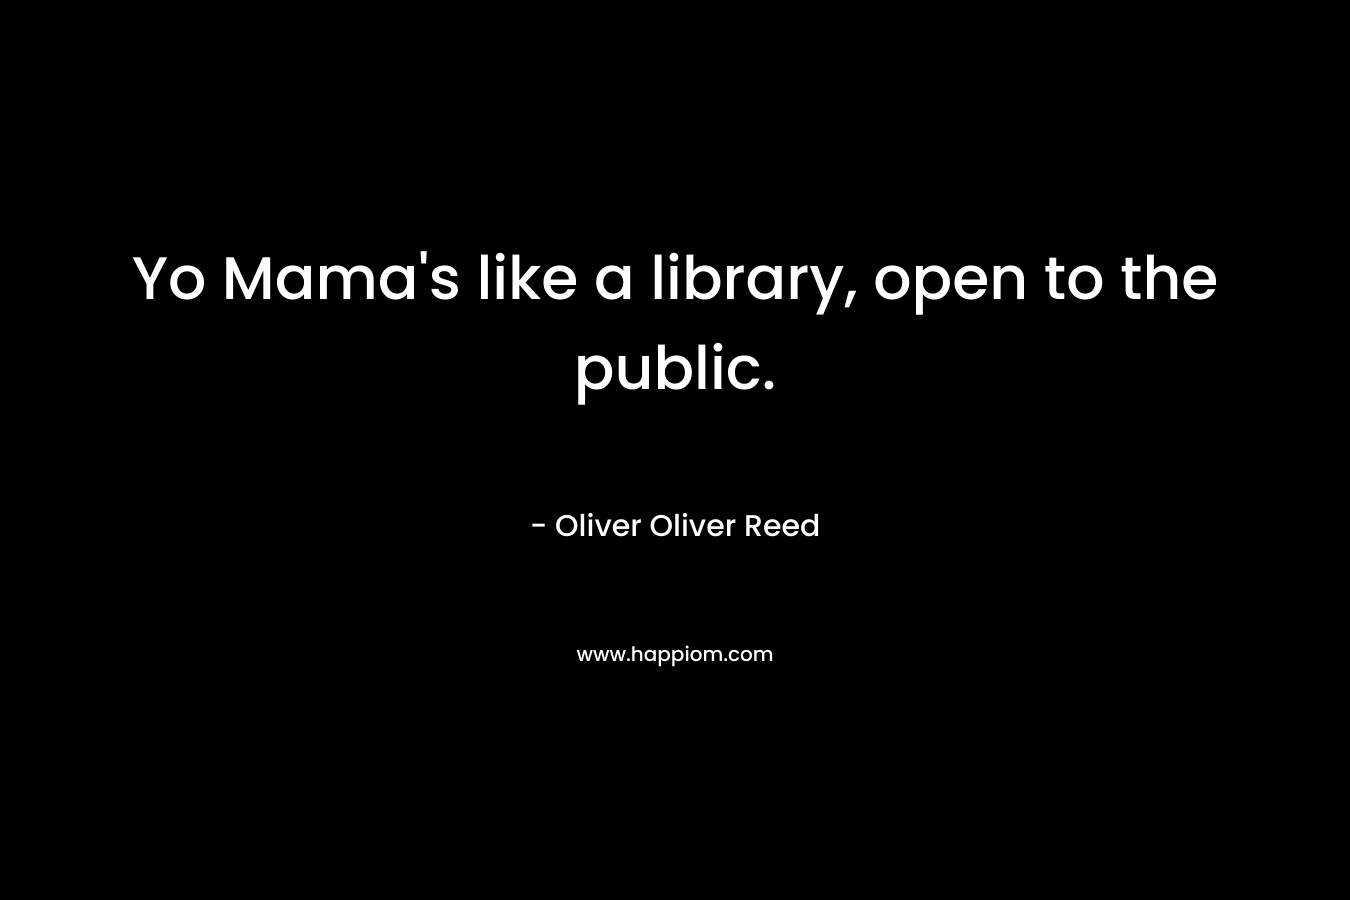 Yo Mama's like a library, open to the public.